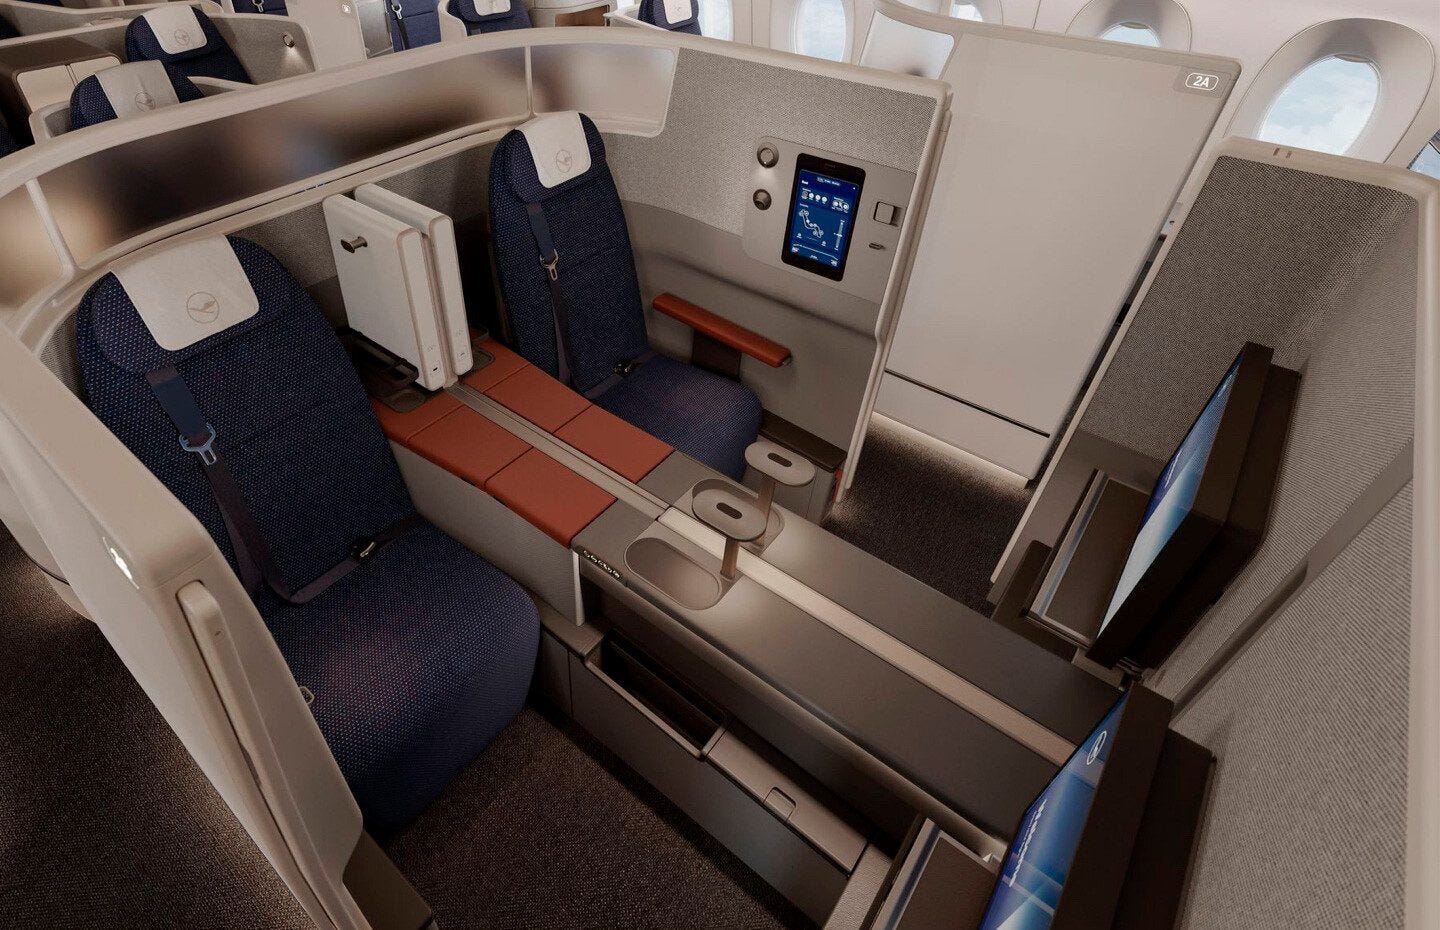 <p>According to RTN, the Classic option will represent the base price of Allegris business class, with extra-amenity options costing more.</p><p>This unbundling approach means travelers who don't want a seat with more work space or a longer bed, for example, don't have to pay for things they don't need.</p>